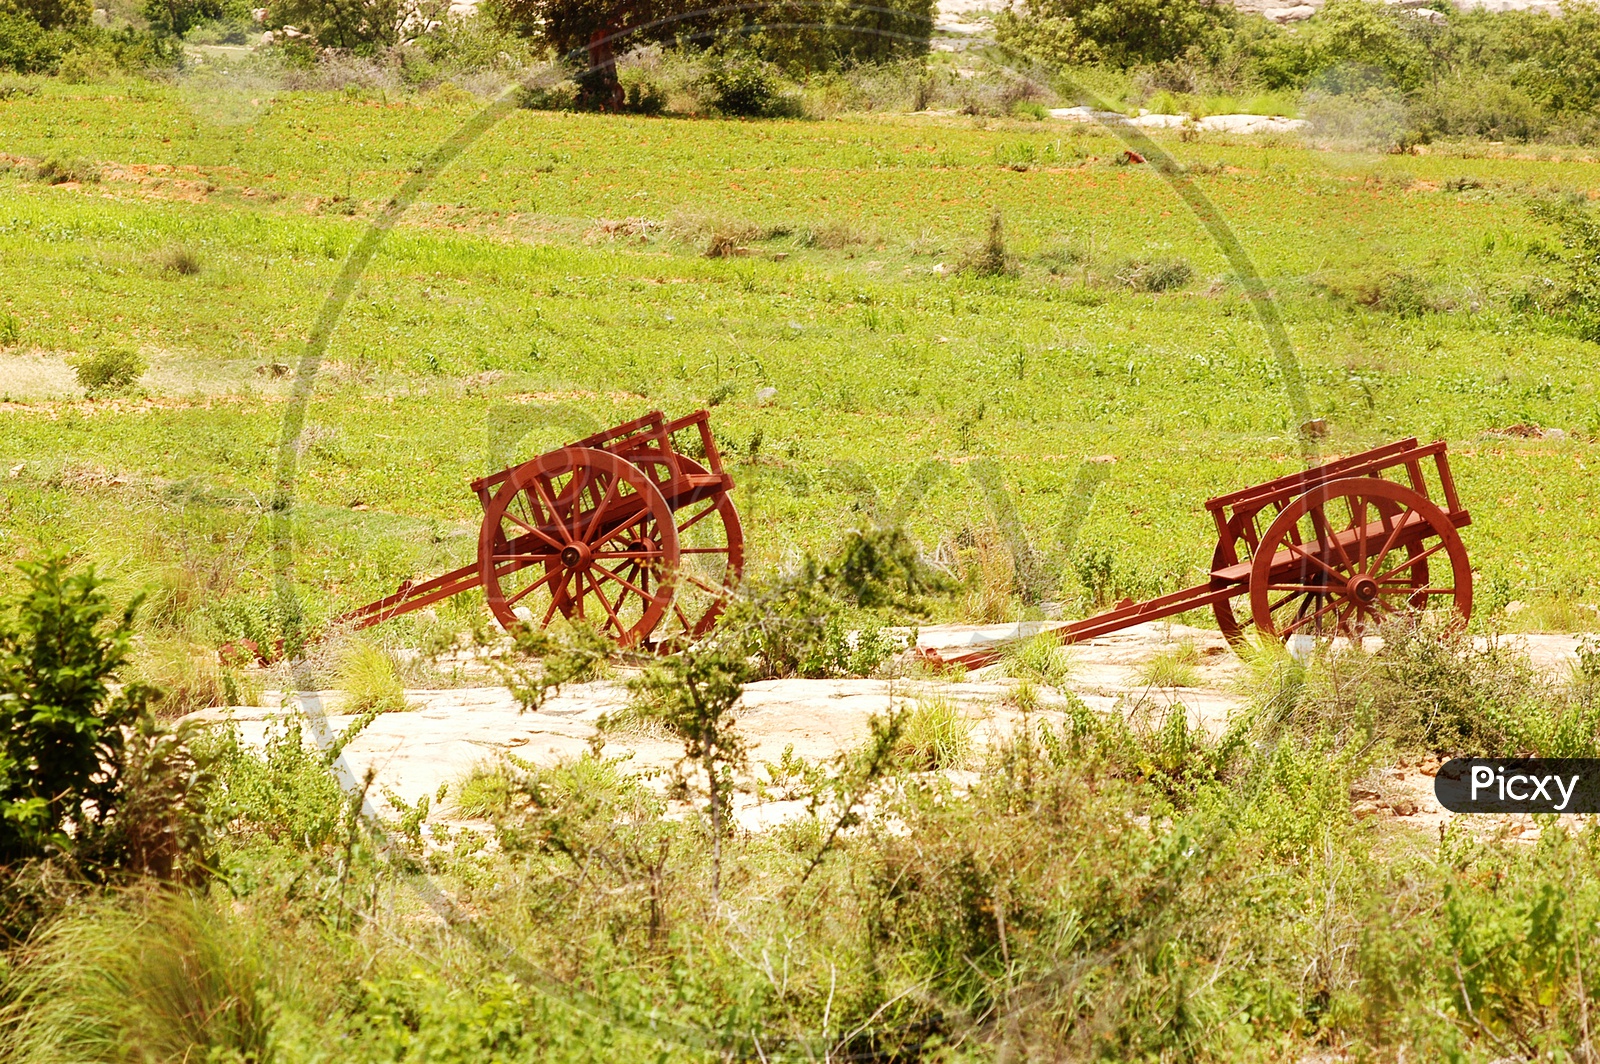 Wooden wagons on the grass land